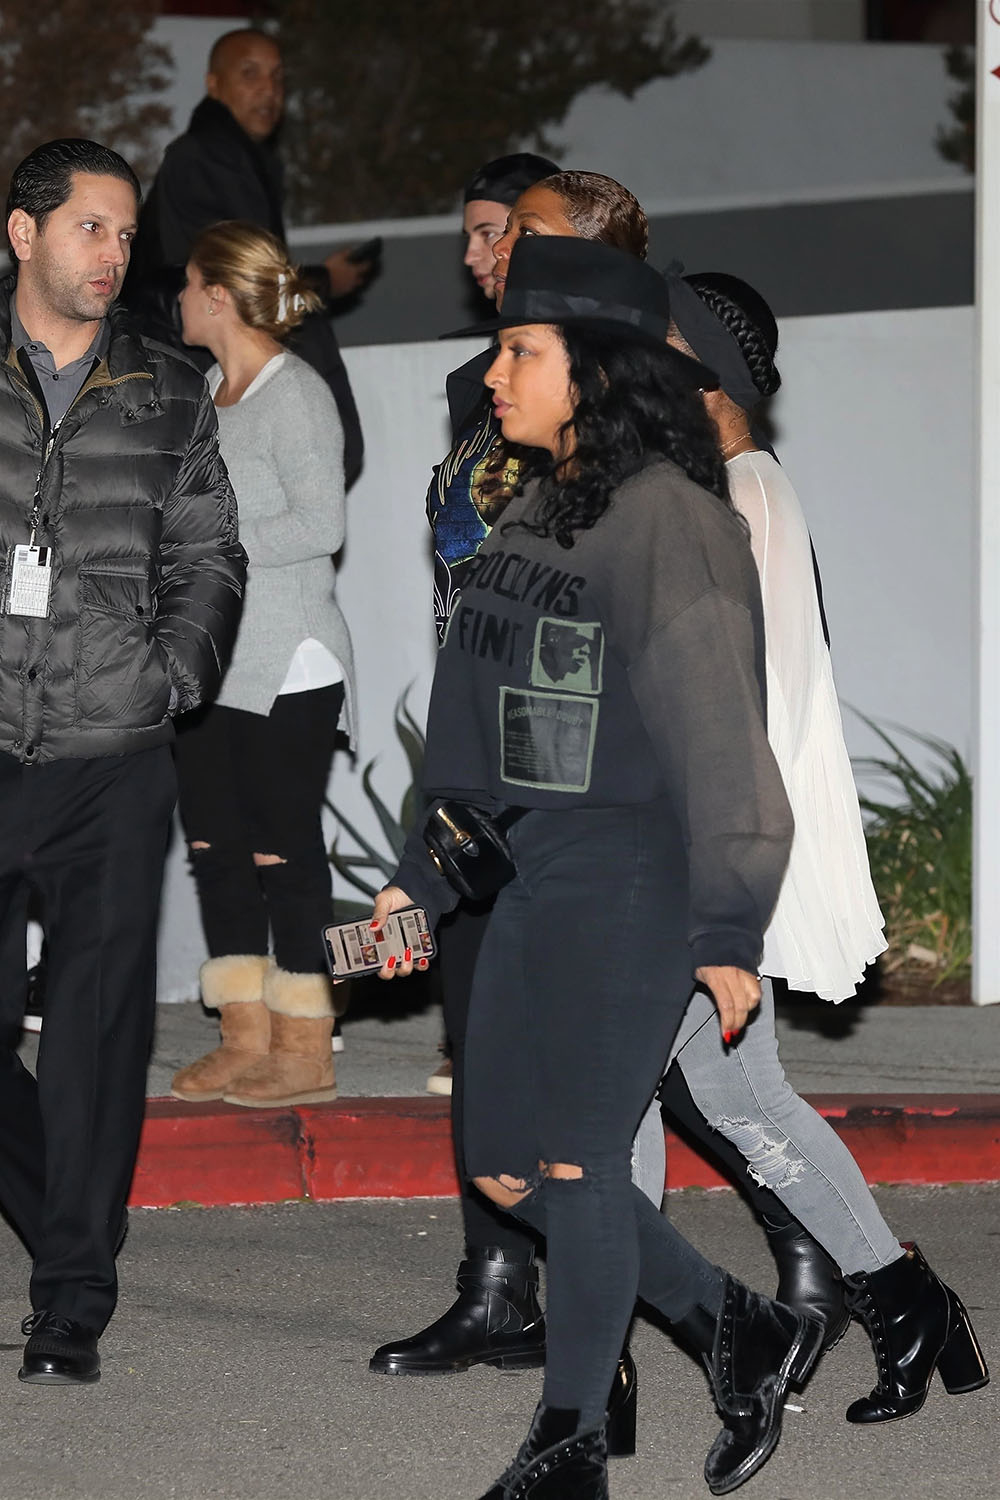 Queen Latifah and girlfriend Eboni attend Jay-Z's concert at The Forum